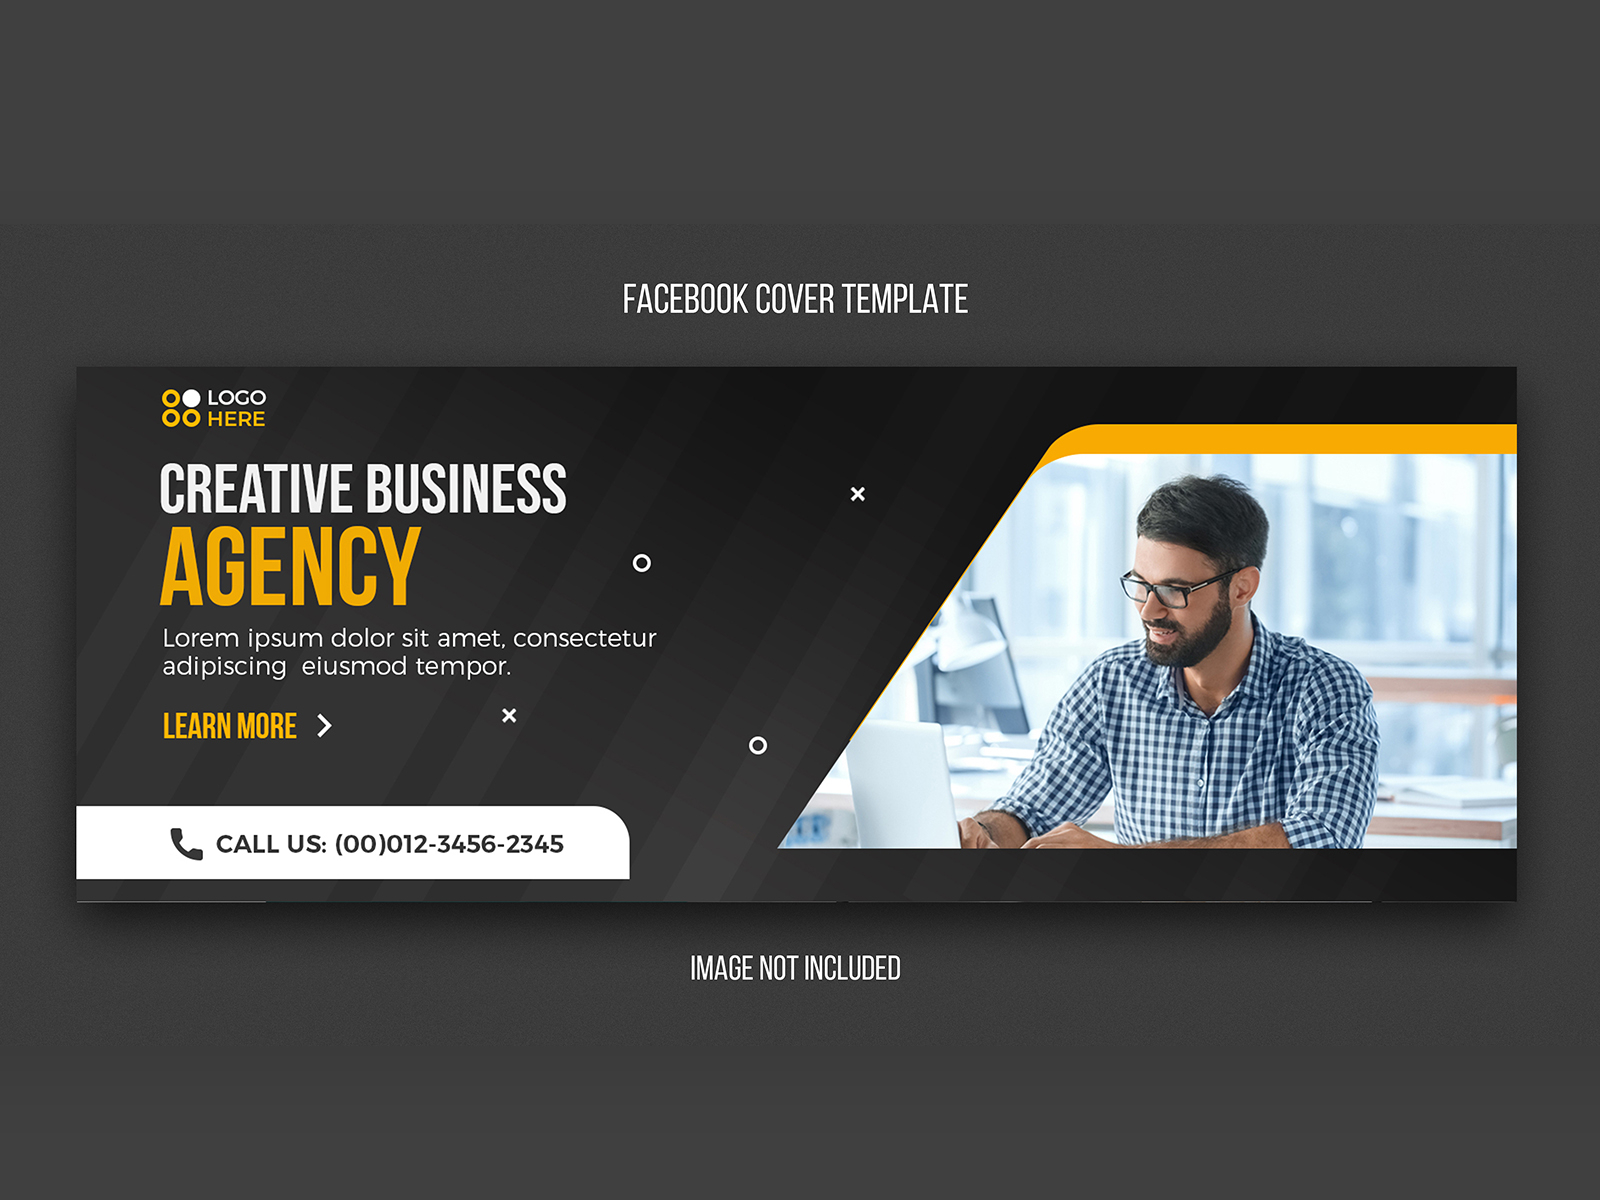 Agency modern facebook cover design template by Mohamed Taha on Pertaining To Photoshop Facebook Banner Template